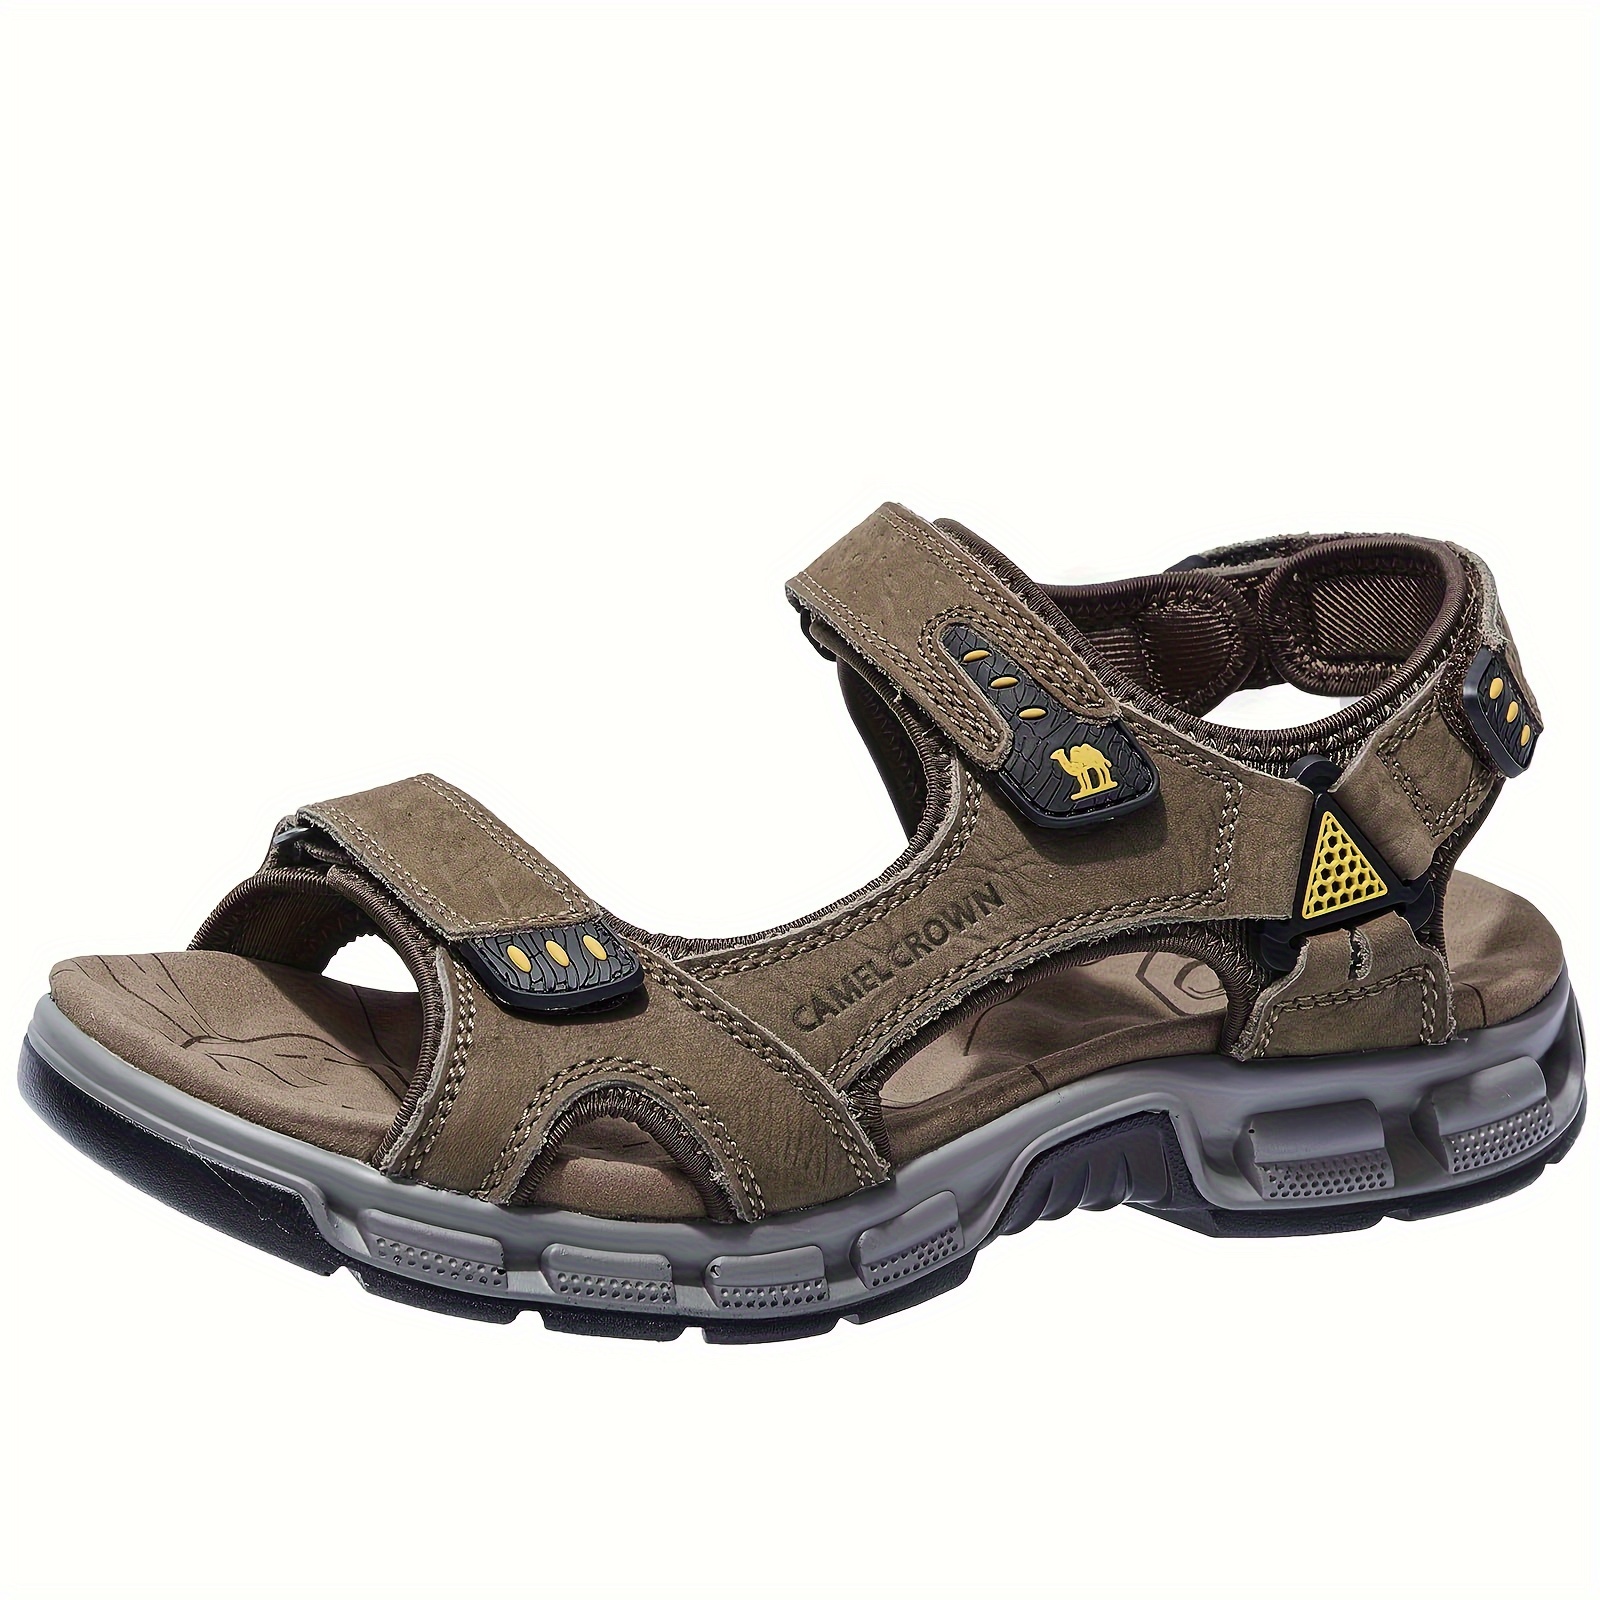 

Camel Crown Men's Hiking Sandals Leather Athletic Walking Non-slip Sandals For Man Soft Cushion Beach Water Fisherman Sandal